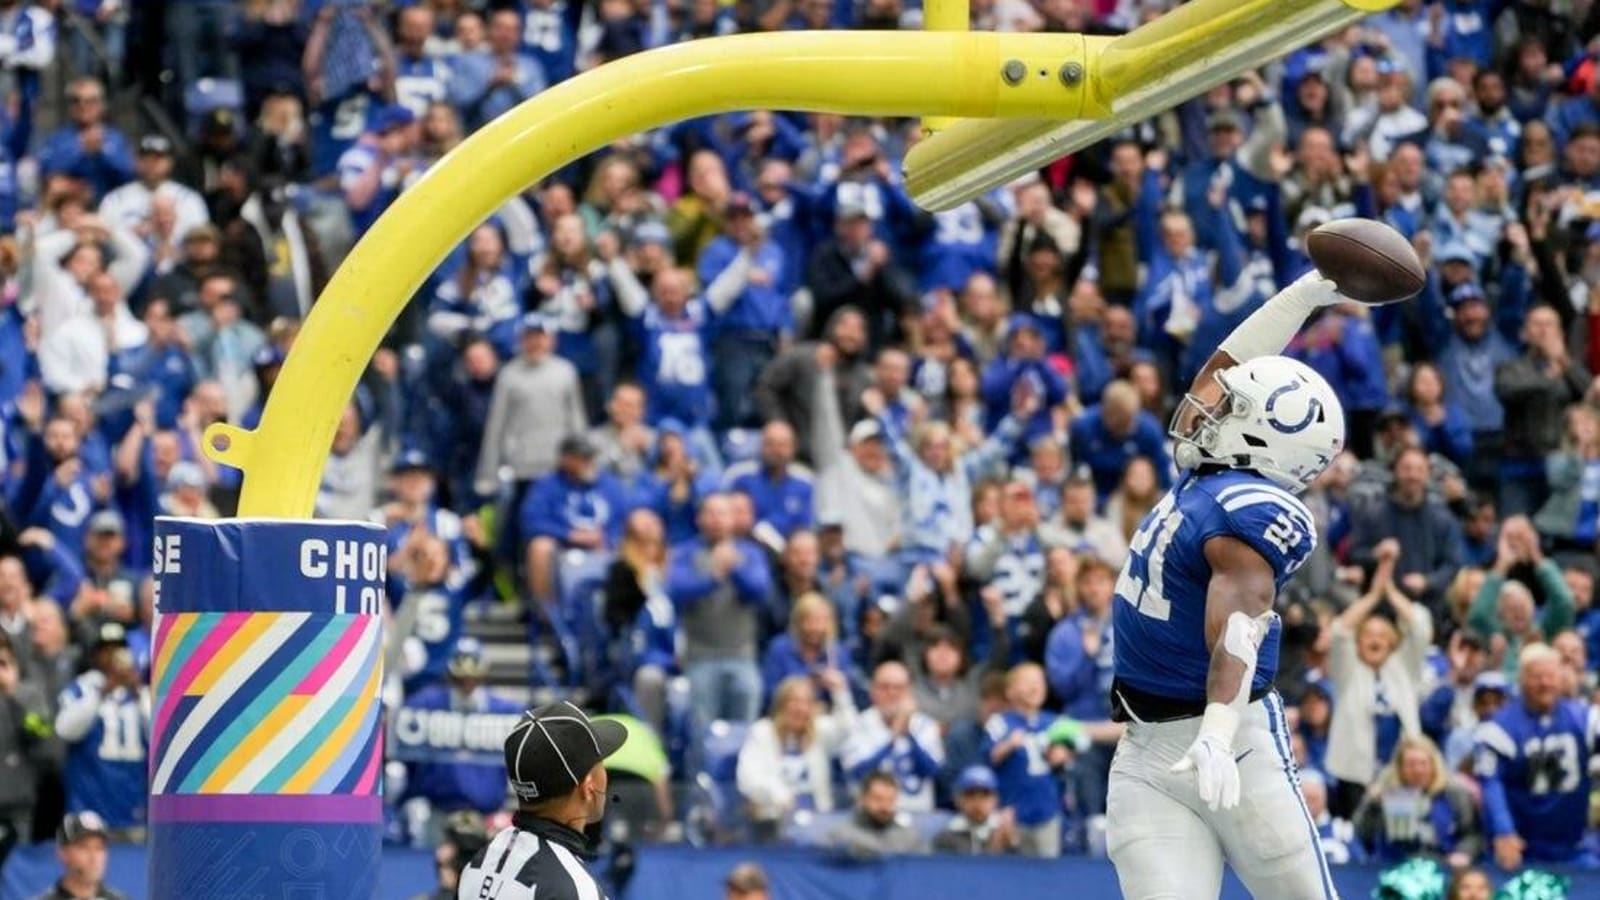 Week 10 Prop Bets: Colts ride RB2 in Germany